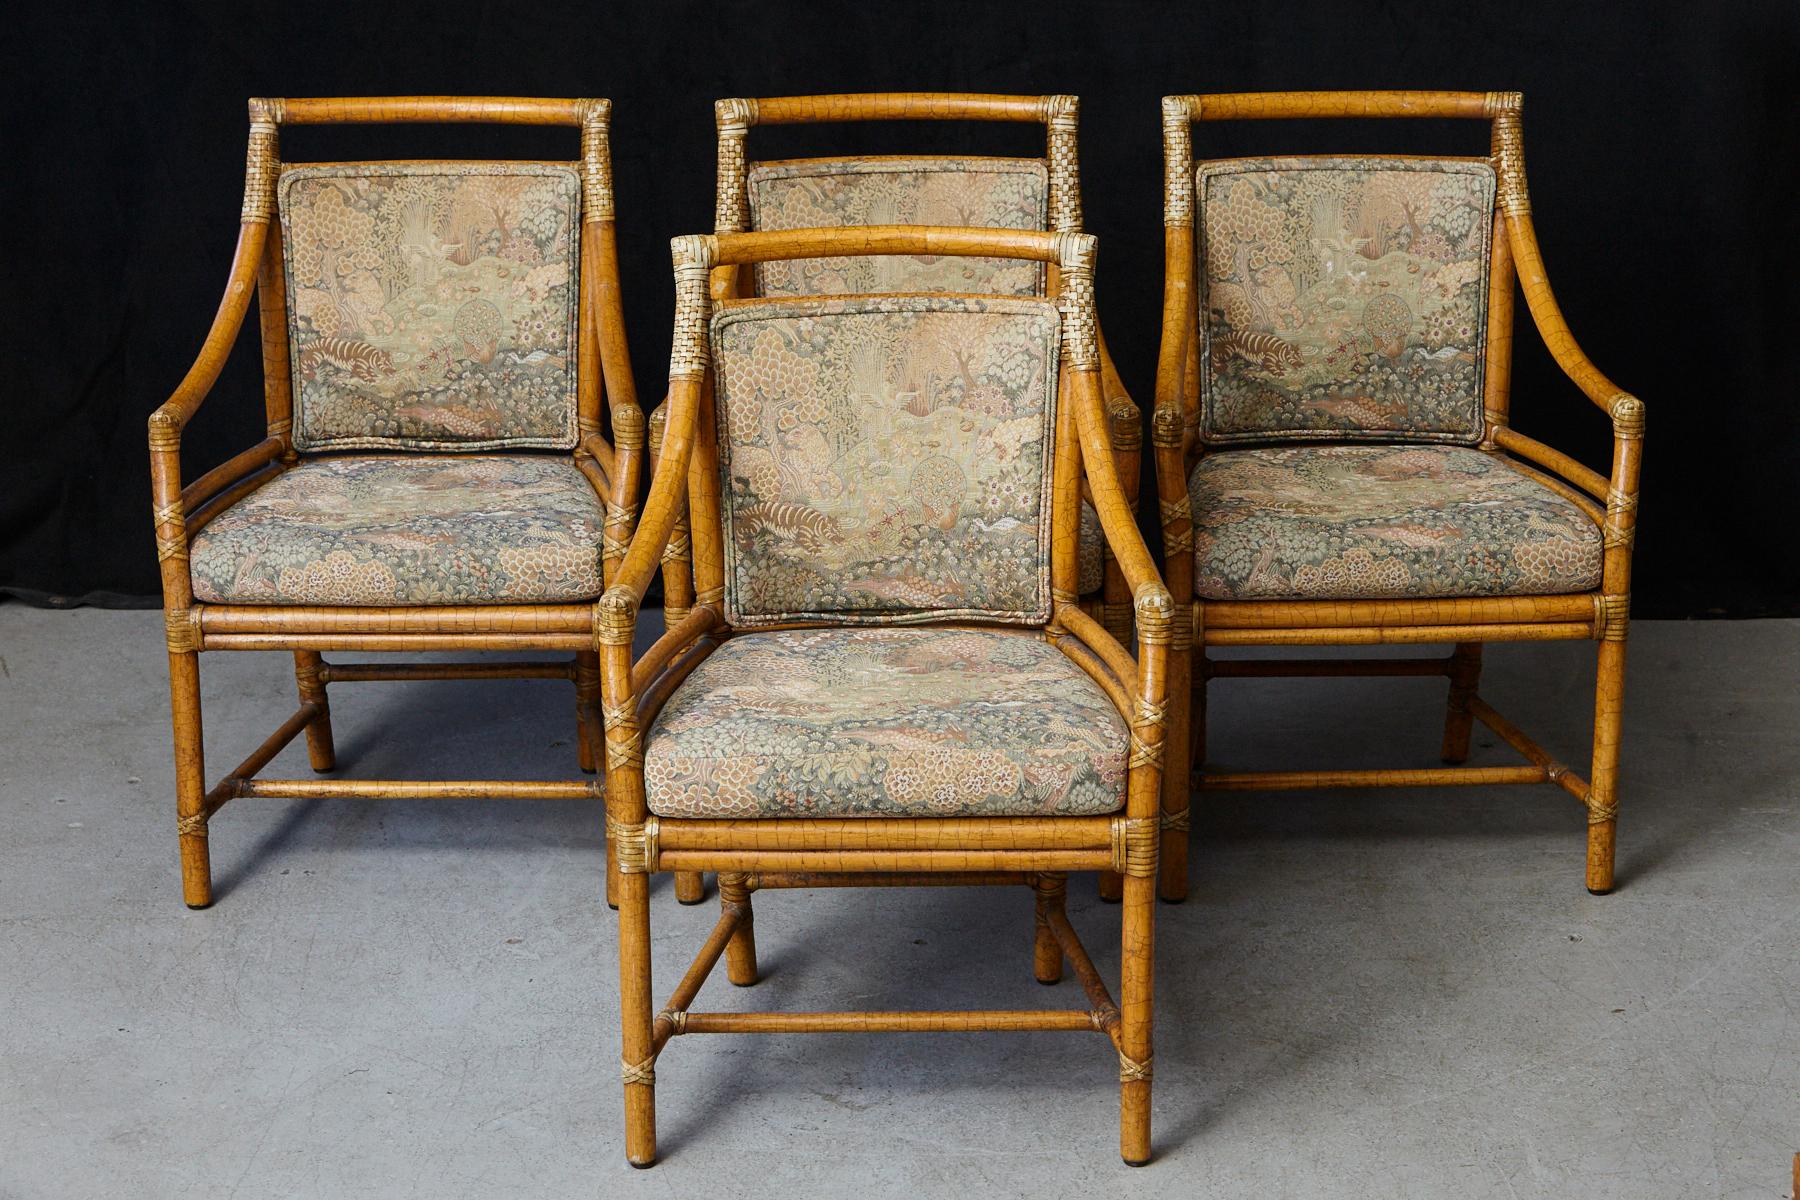 Designed by Elinor McGuire, this impeccably crafted arm chair displays a rattan back, which frames McGuire's signature Rattan Target design. The set of armchairs comes with upholstered seats and features loose cushions.

The chairs are very solid,